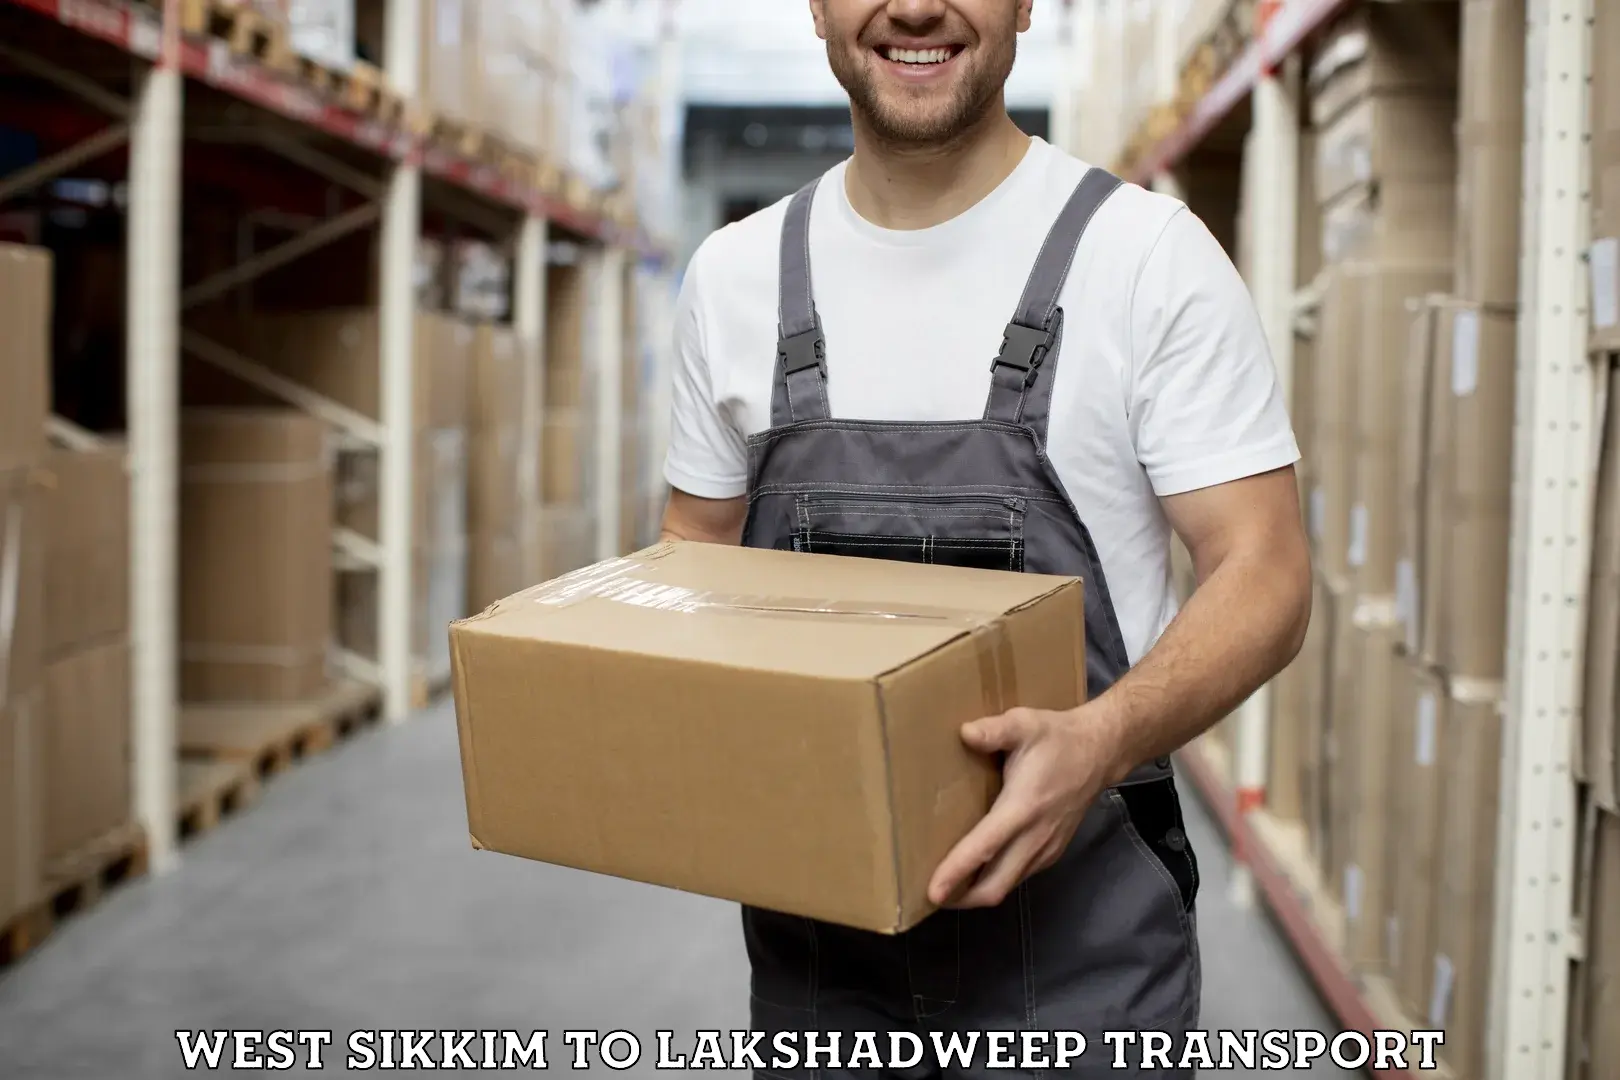 Container transport service West Sikkim to Lakshadweep